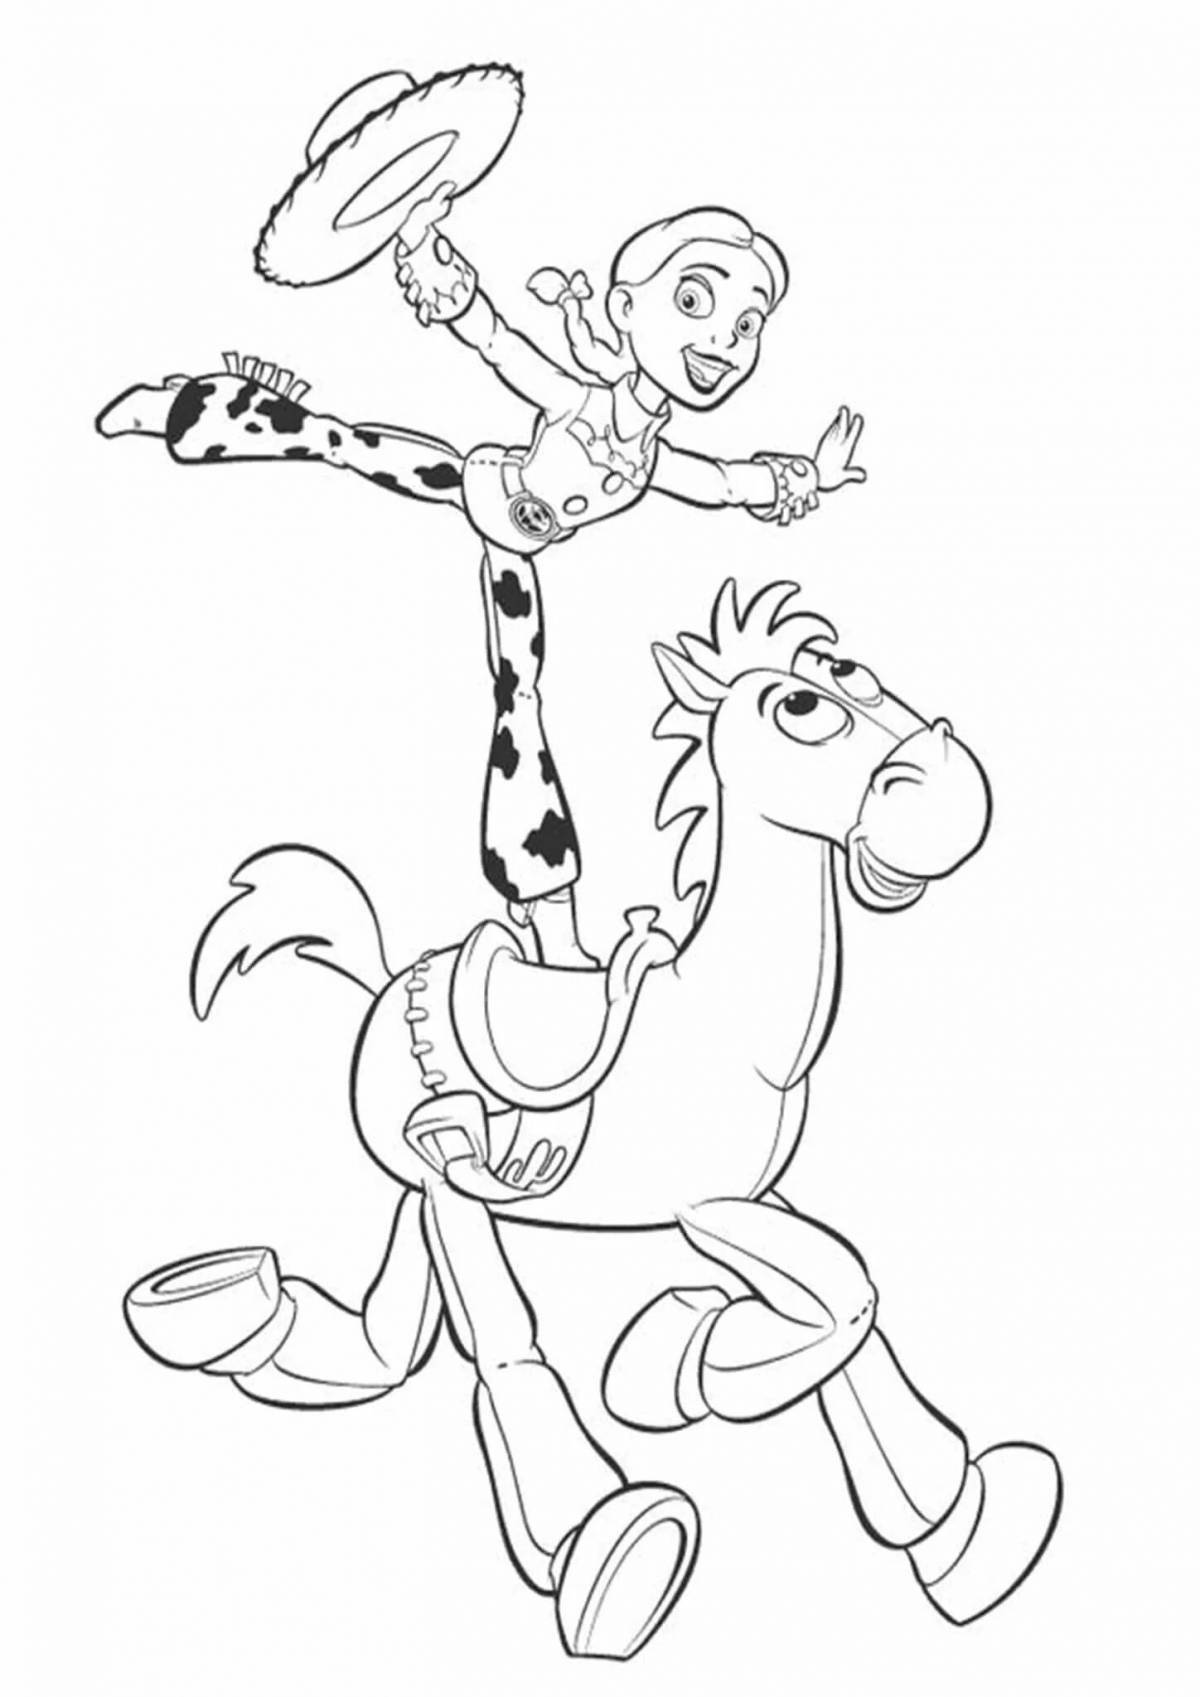 Jesse's Wonderful Toy Story Coloring Page